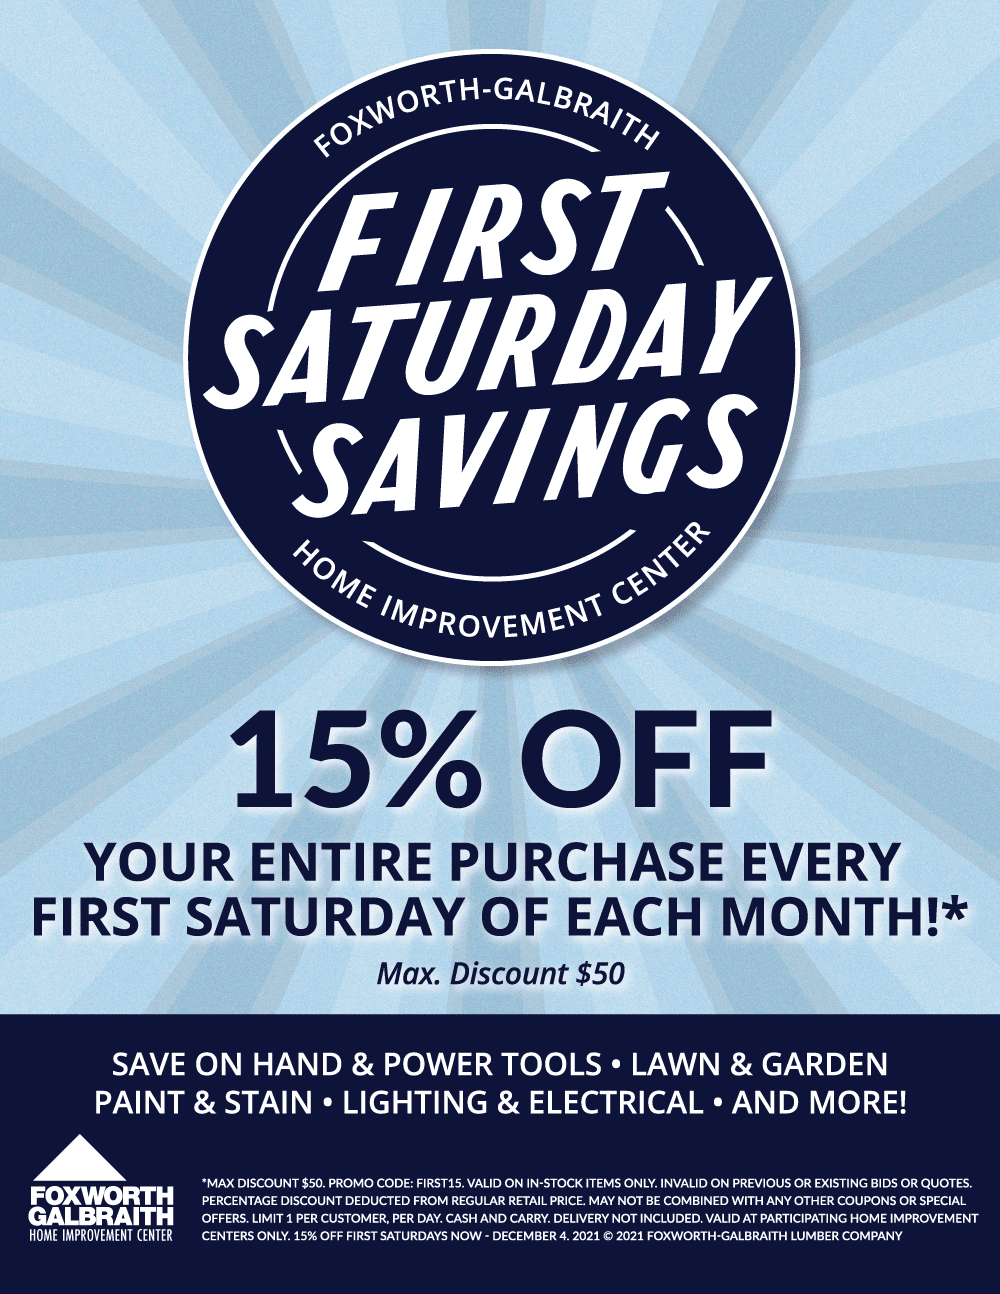 Take 15% Off Every First Saturday of the Month!